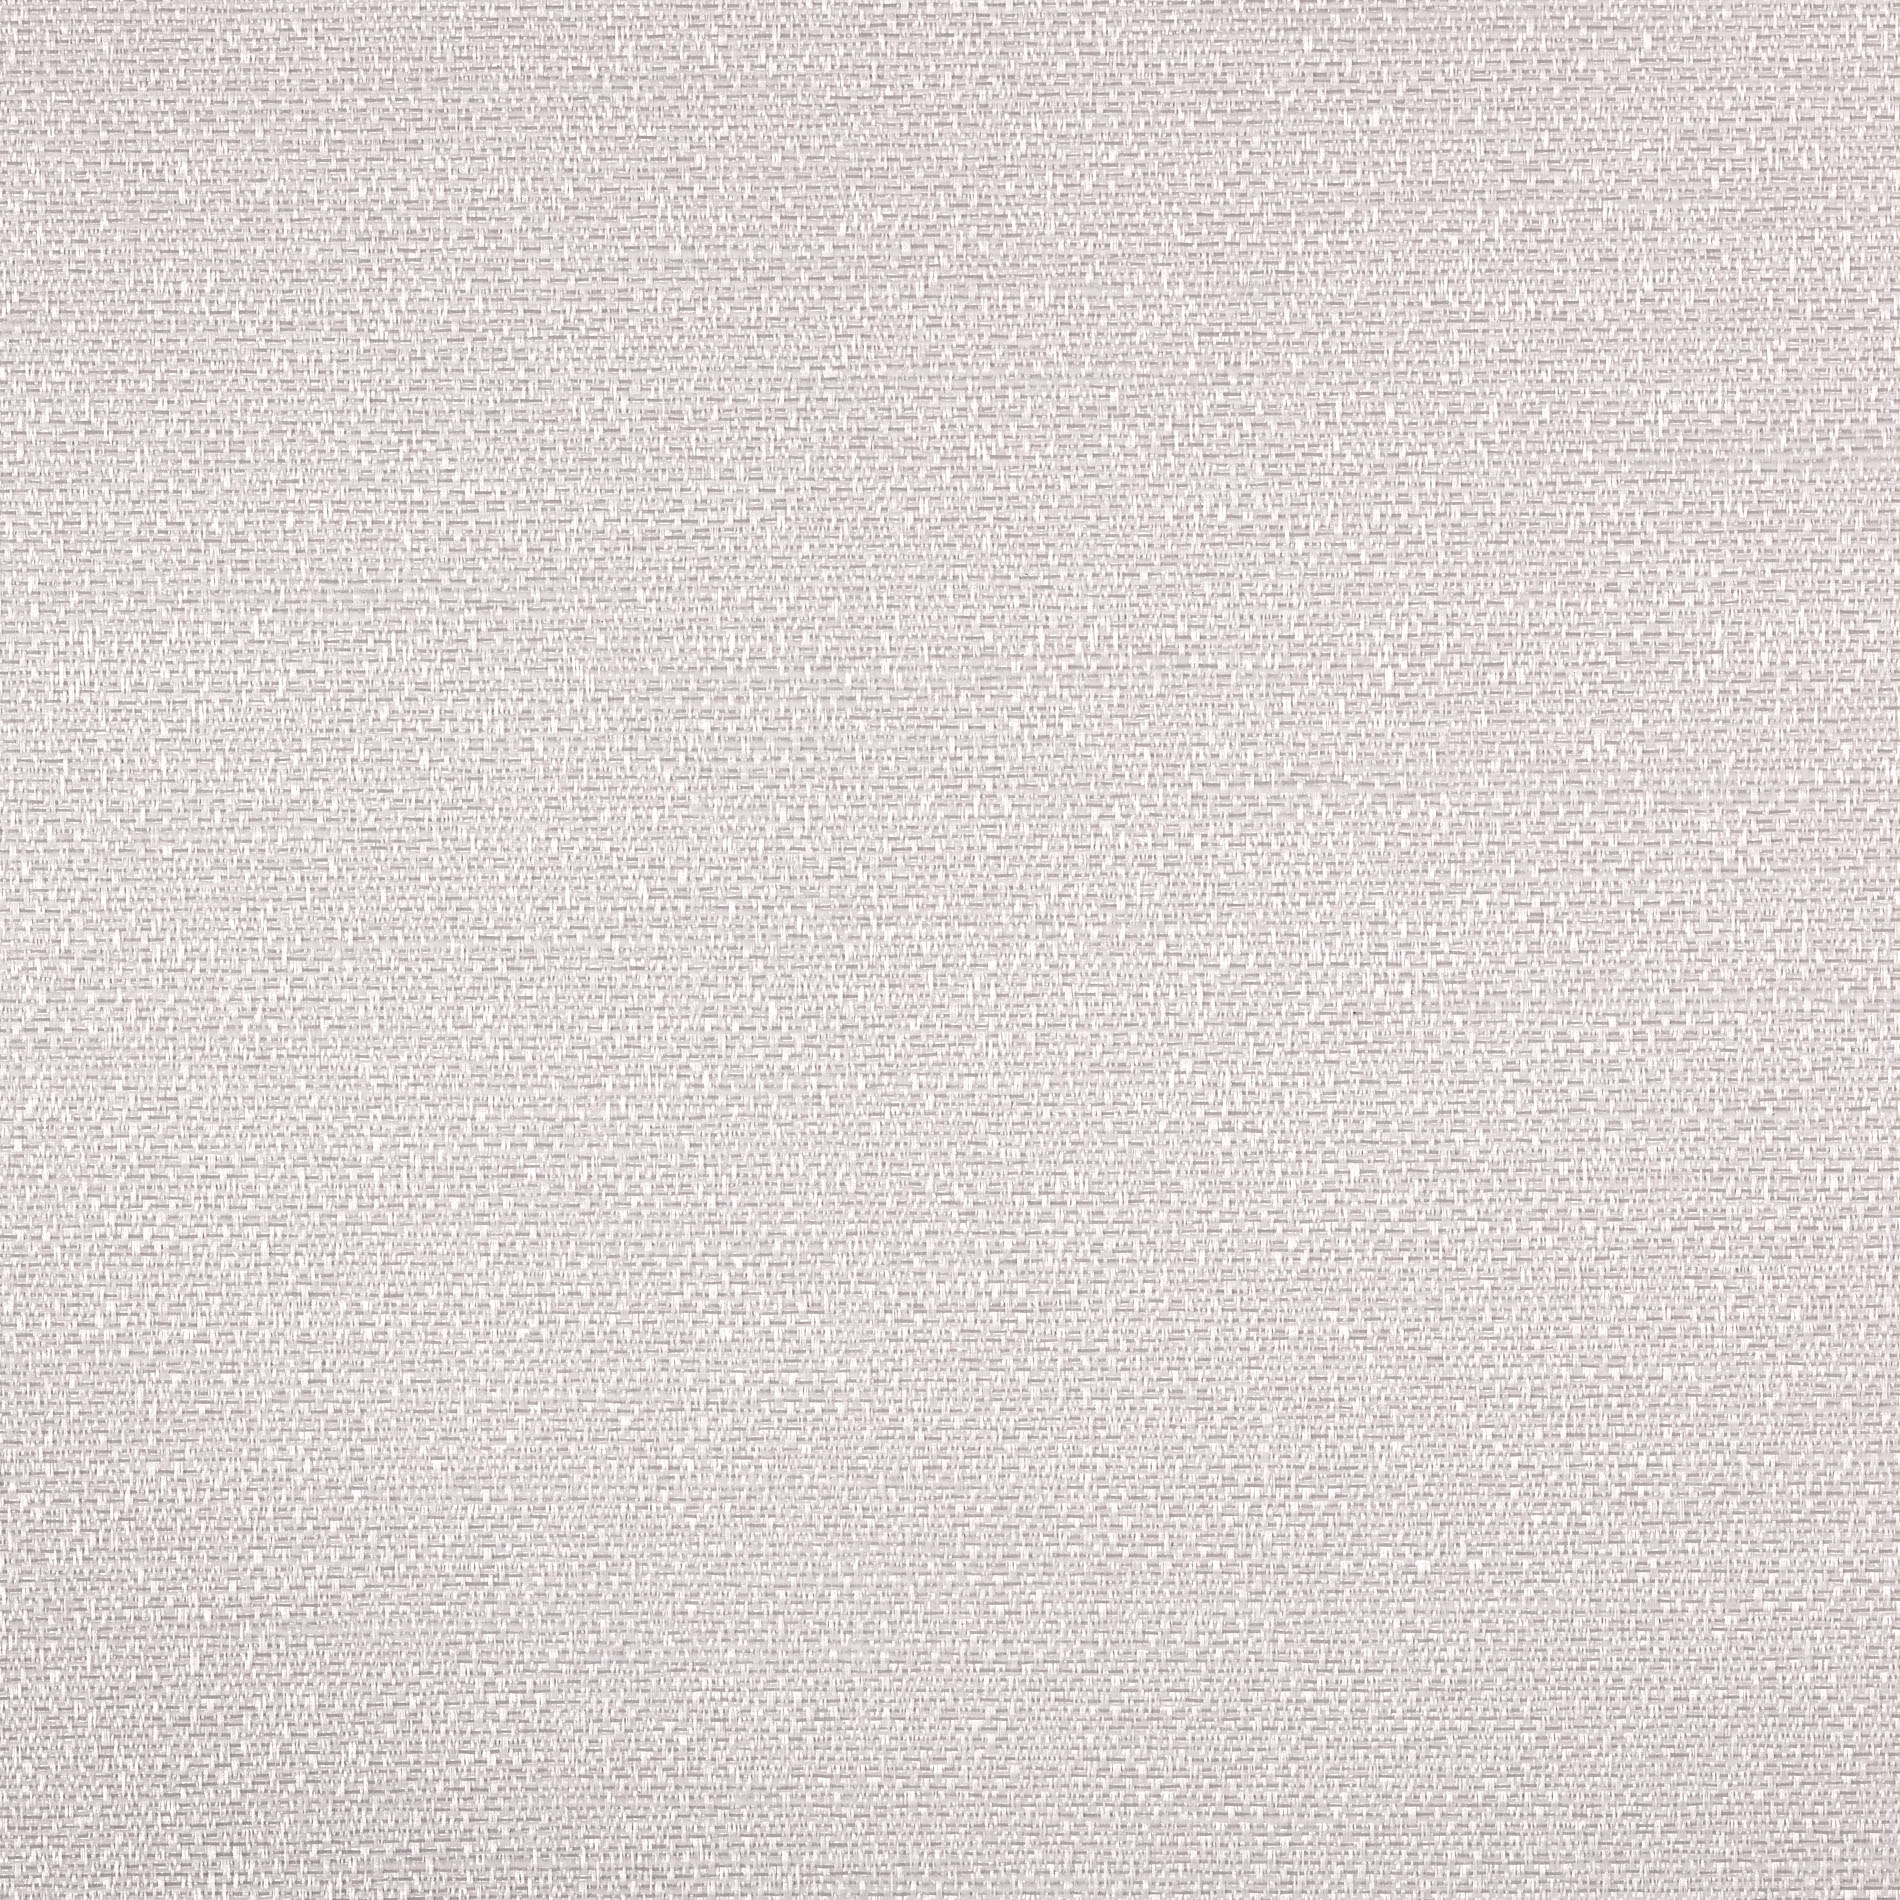 Altex - Fabric - BROOME II OPAQUE - Offwhite - 14BR33415